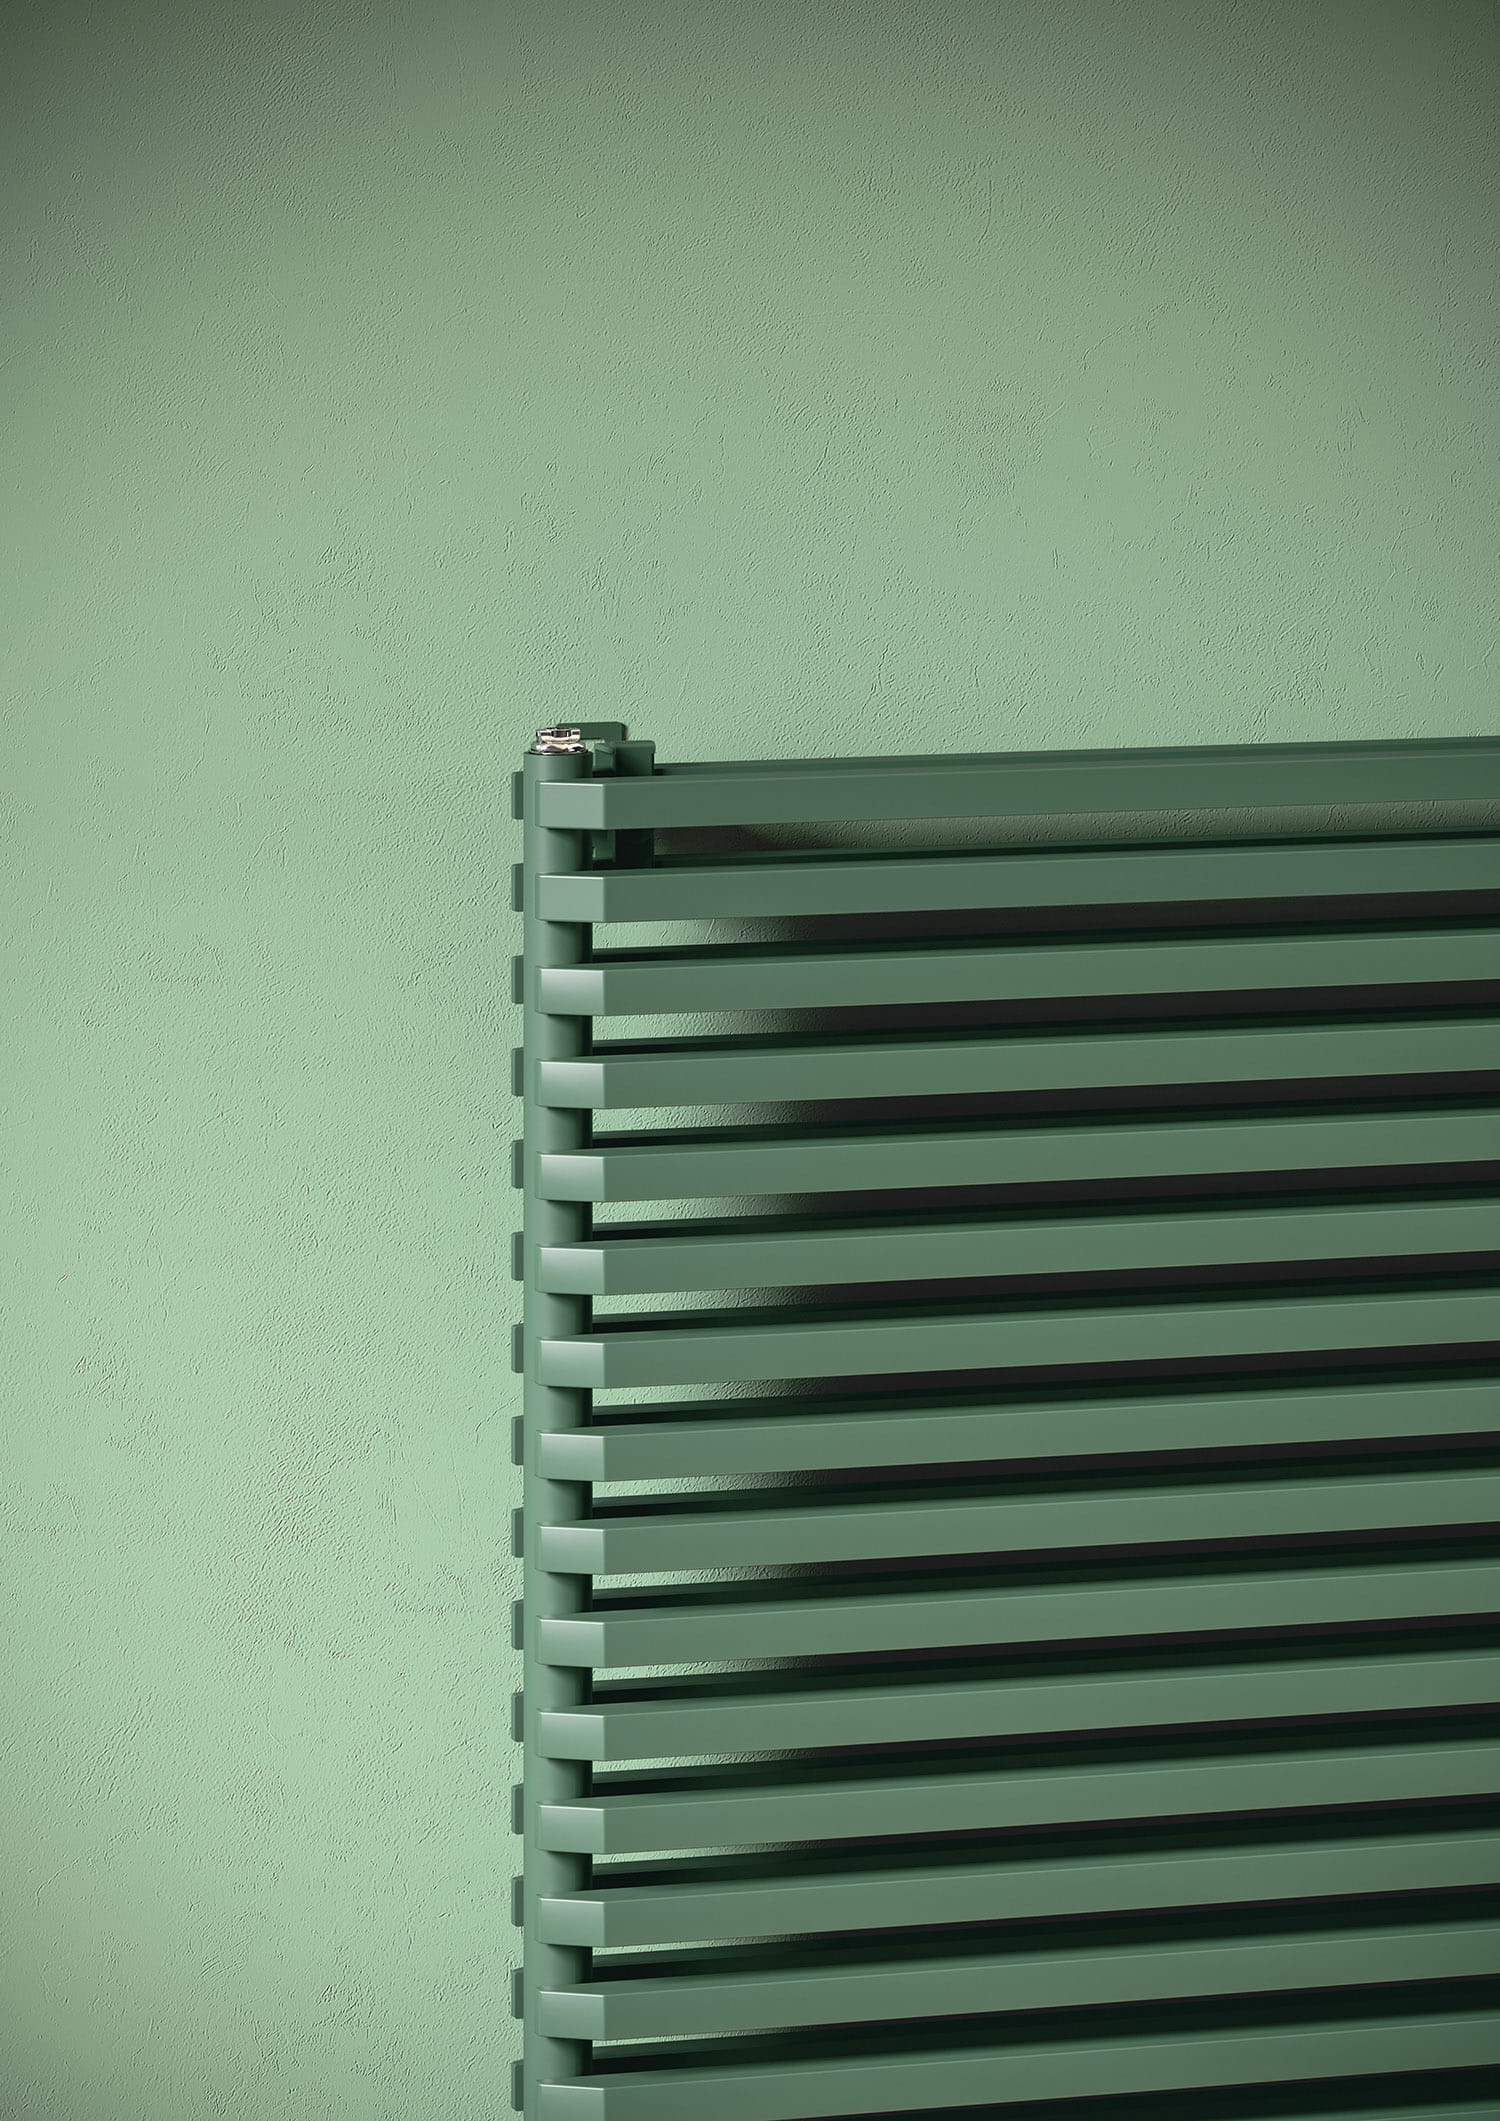 Sax 2, Horizontal, 20 elements, Hight 800 mm, Lenght 1800 mm, Woodland Green - RAL 6005, (detail)